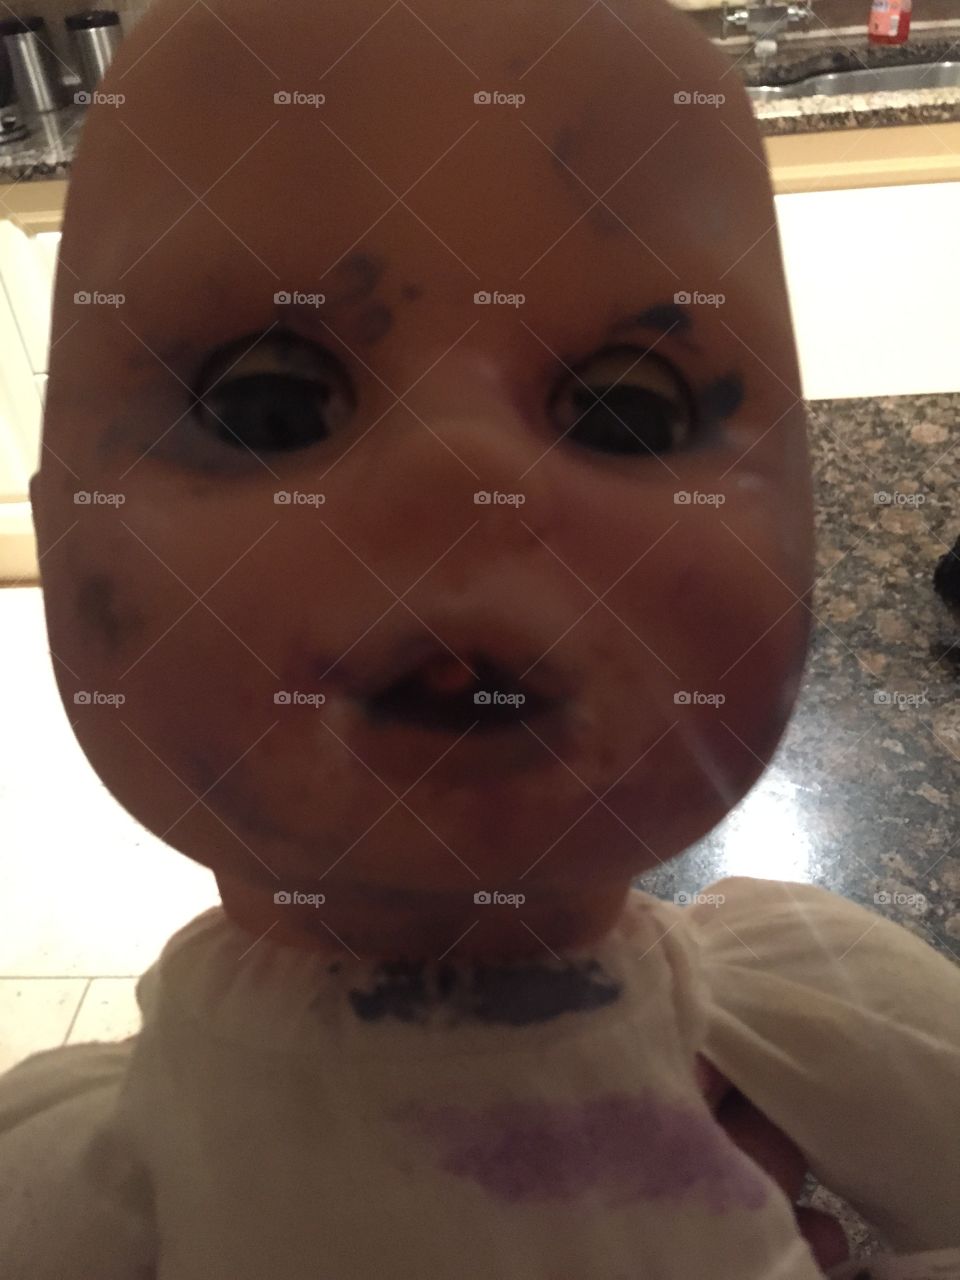 Scary Doll